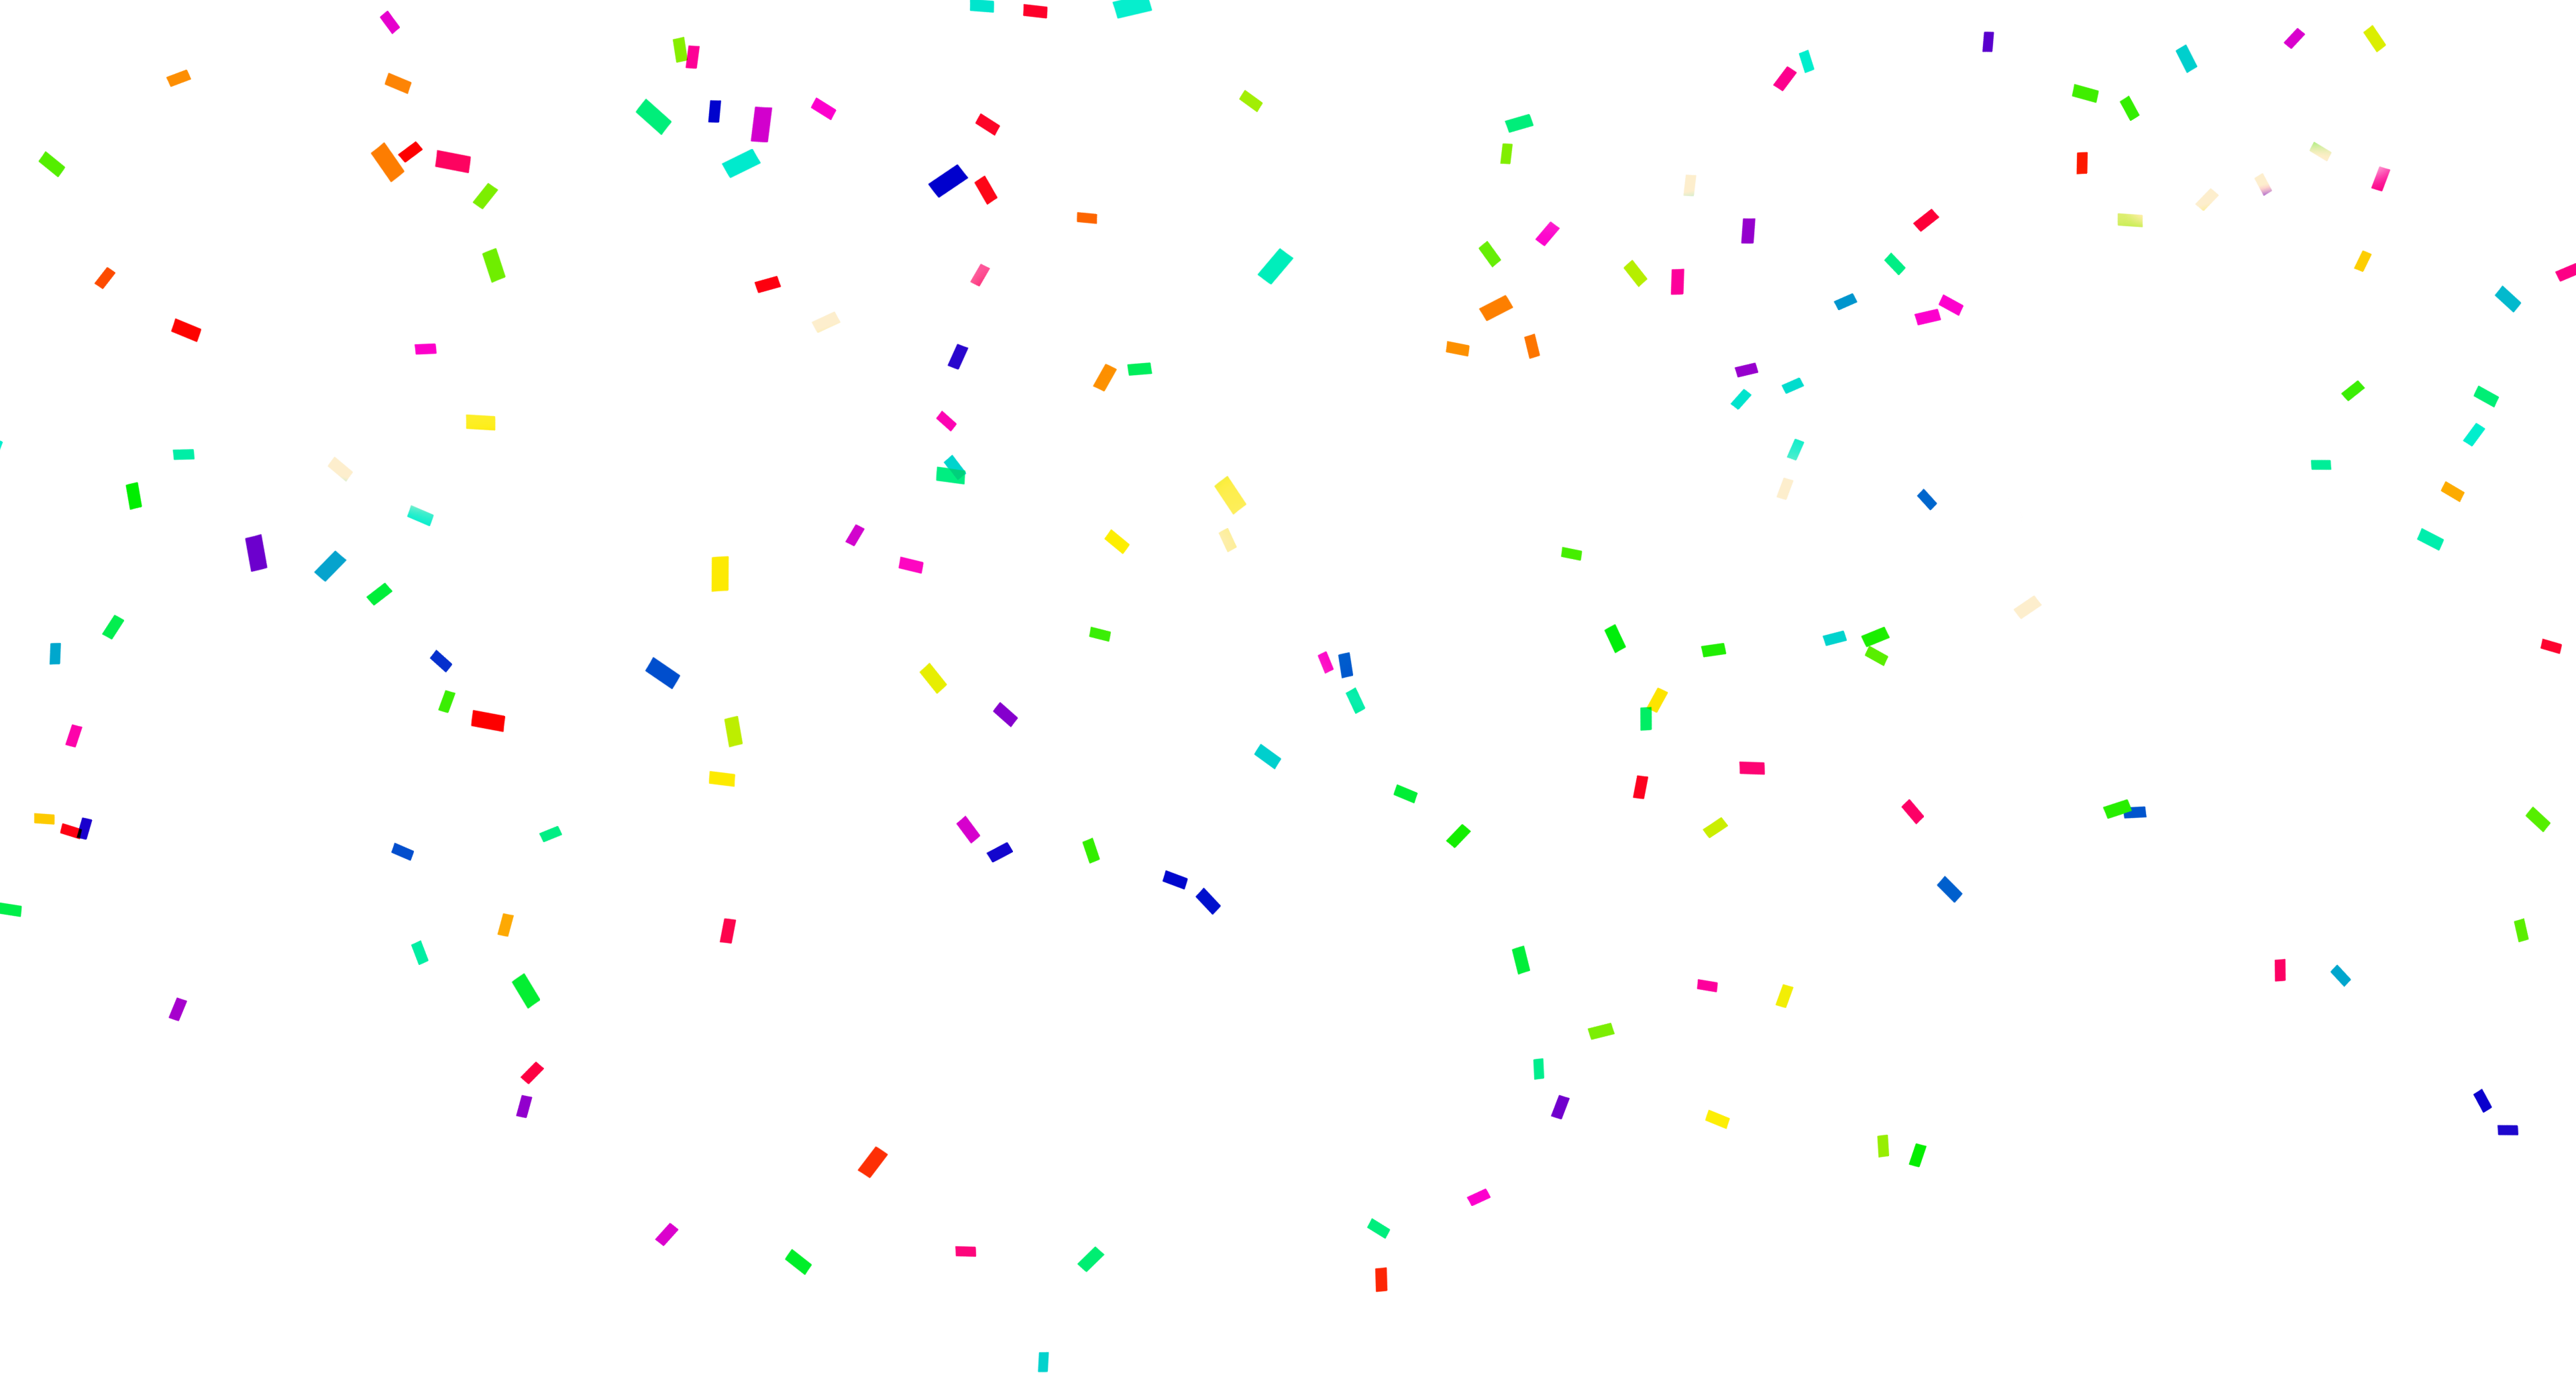 44_extra_confetti_spinatagrande.png thumbnail